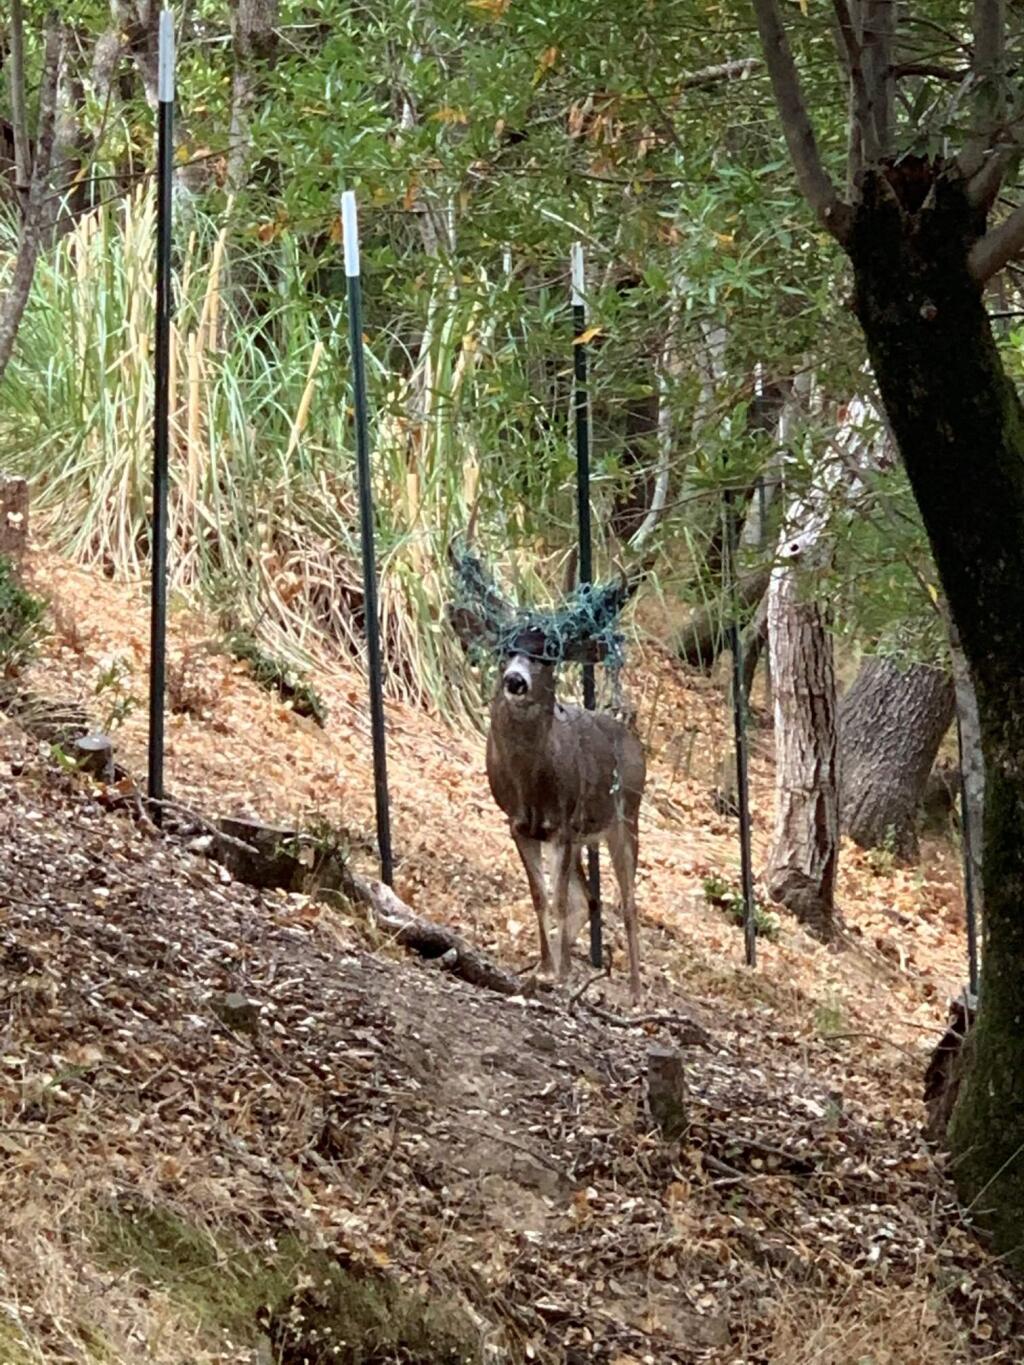 The Marin Humane Society spotted a buck with Christmas lights tangled in his antlers the week of Thanksgiving. Because bucks are hard to catch, the decorations will remain on the animal's antlers until they shed this winter. (Marin Humane/Facebook)